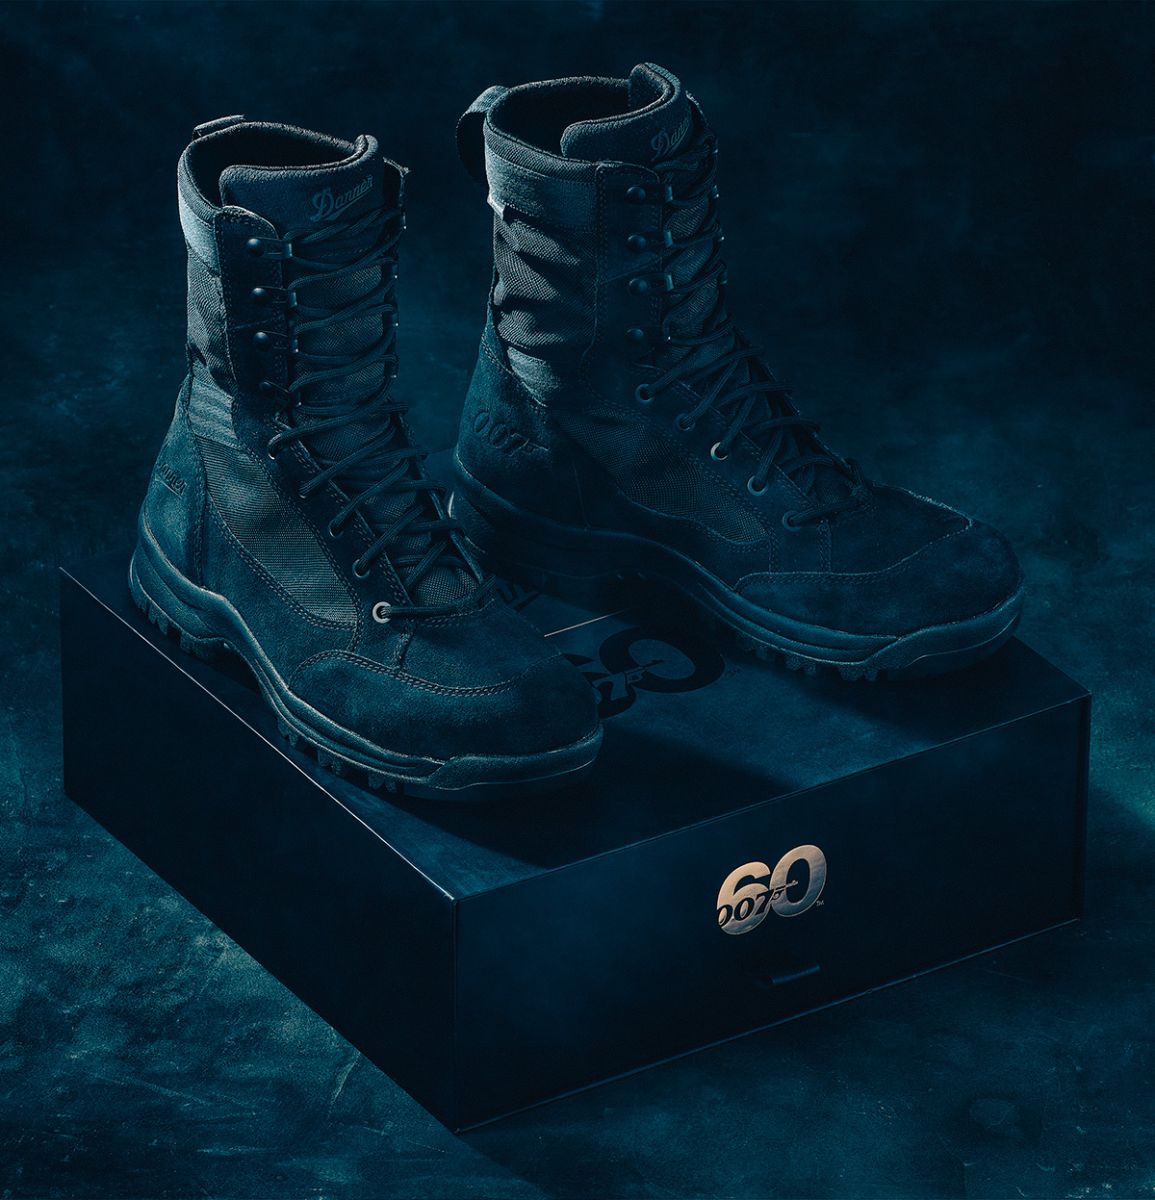 Danner releases 60th Anniversary editions of Tanicus and Mountain 